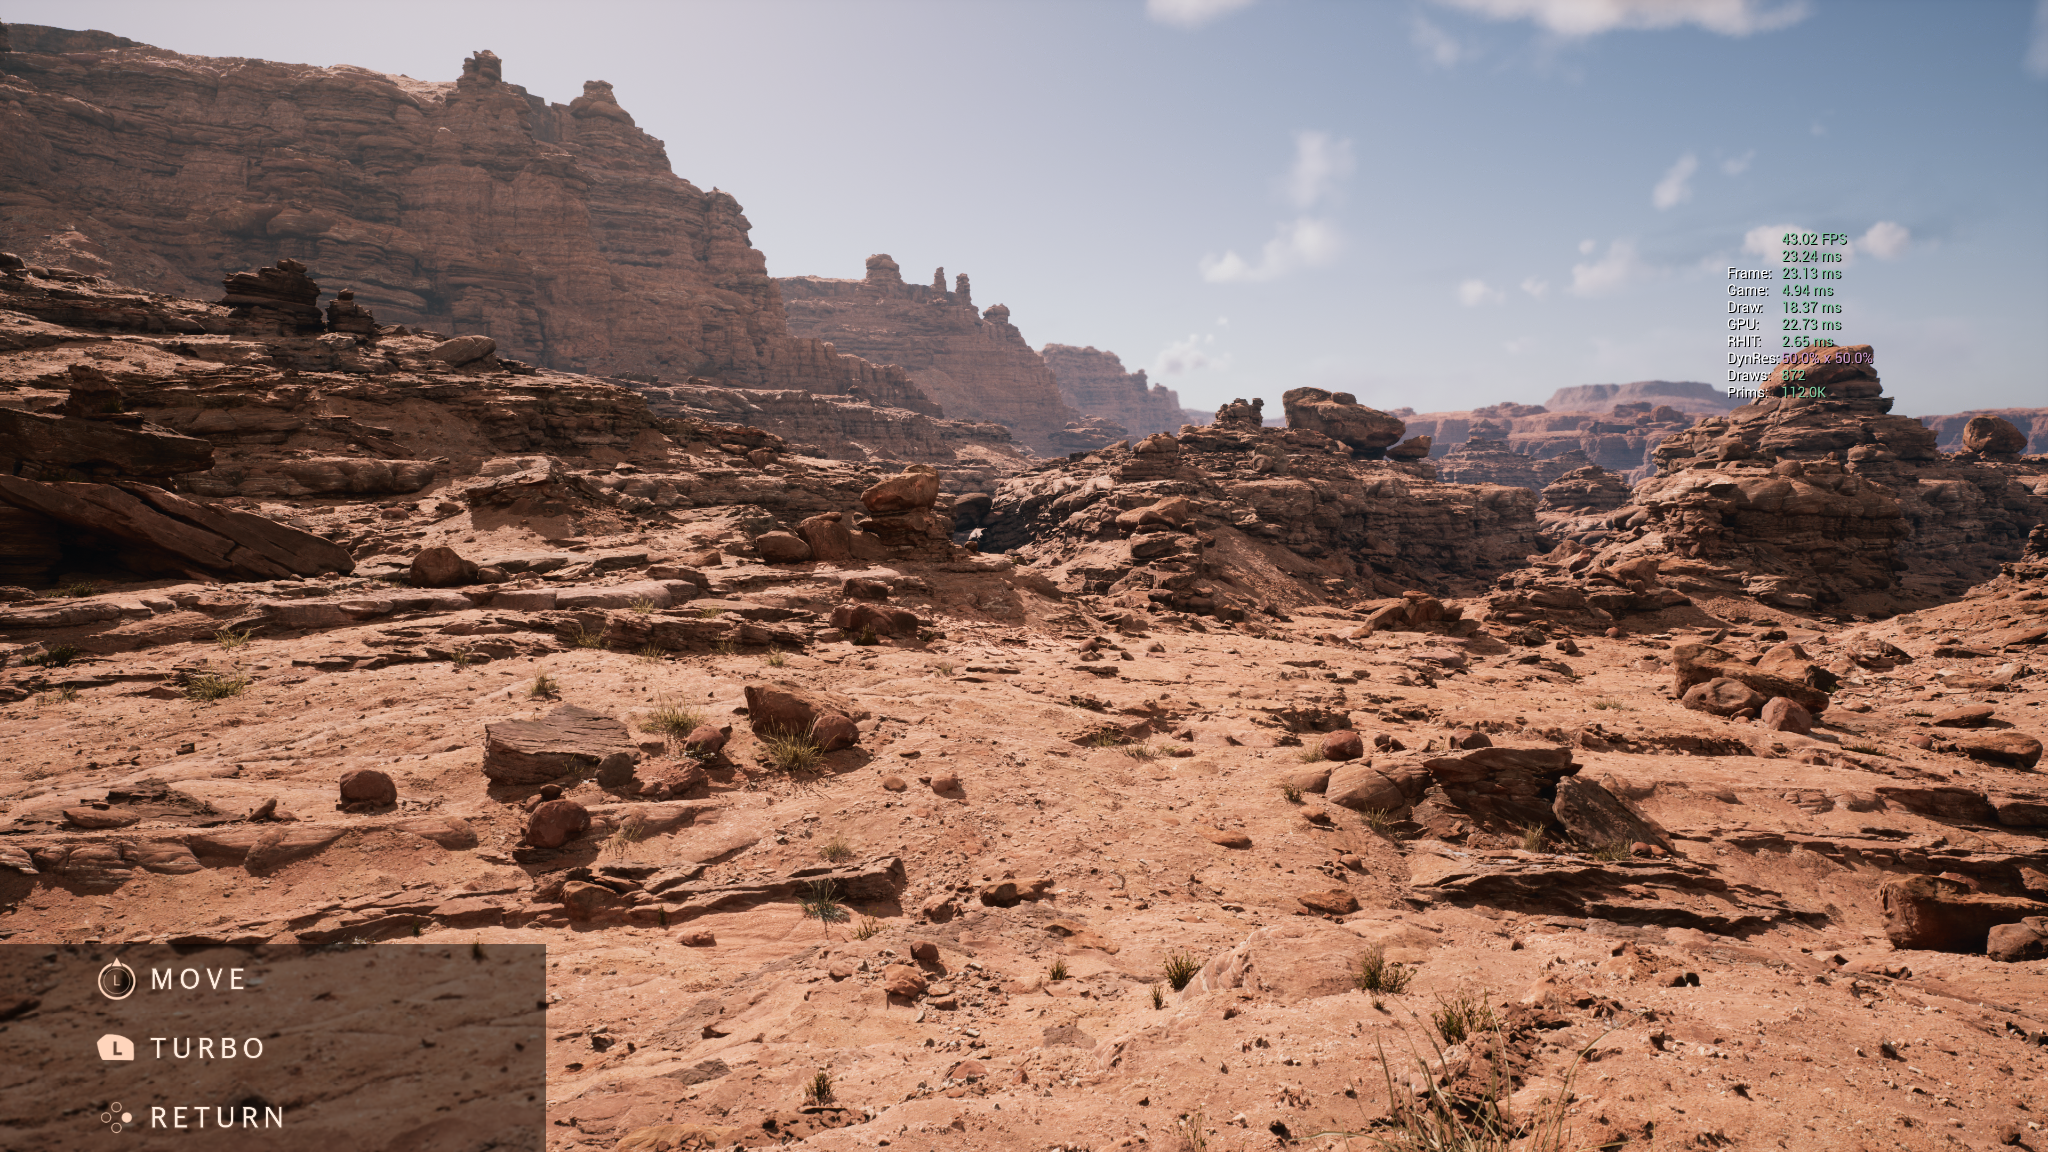 Screenshots from Epic's Unreal Engine and different resolutions